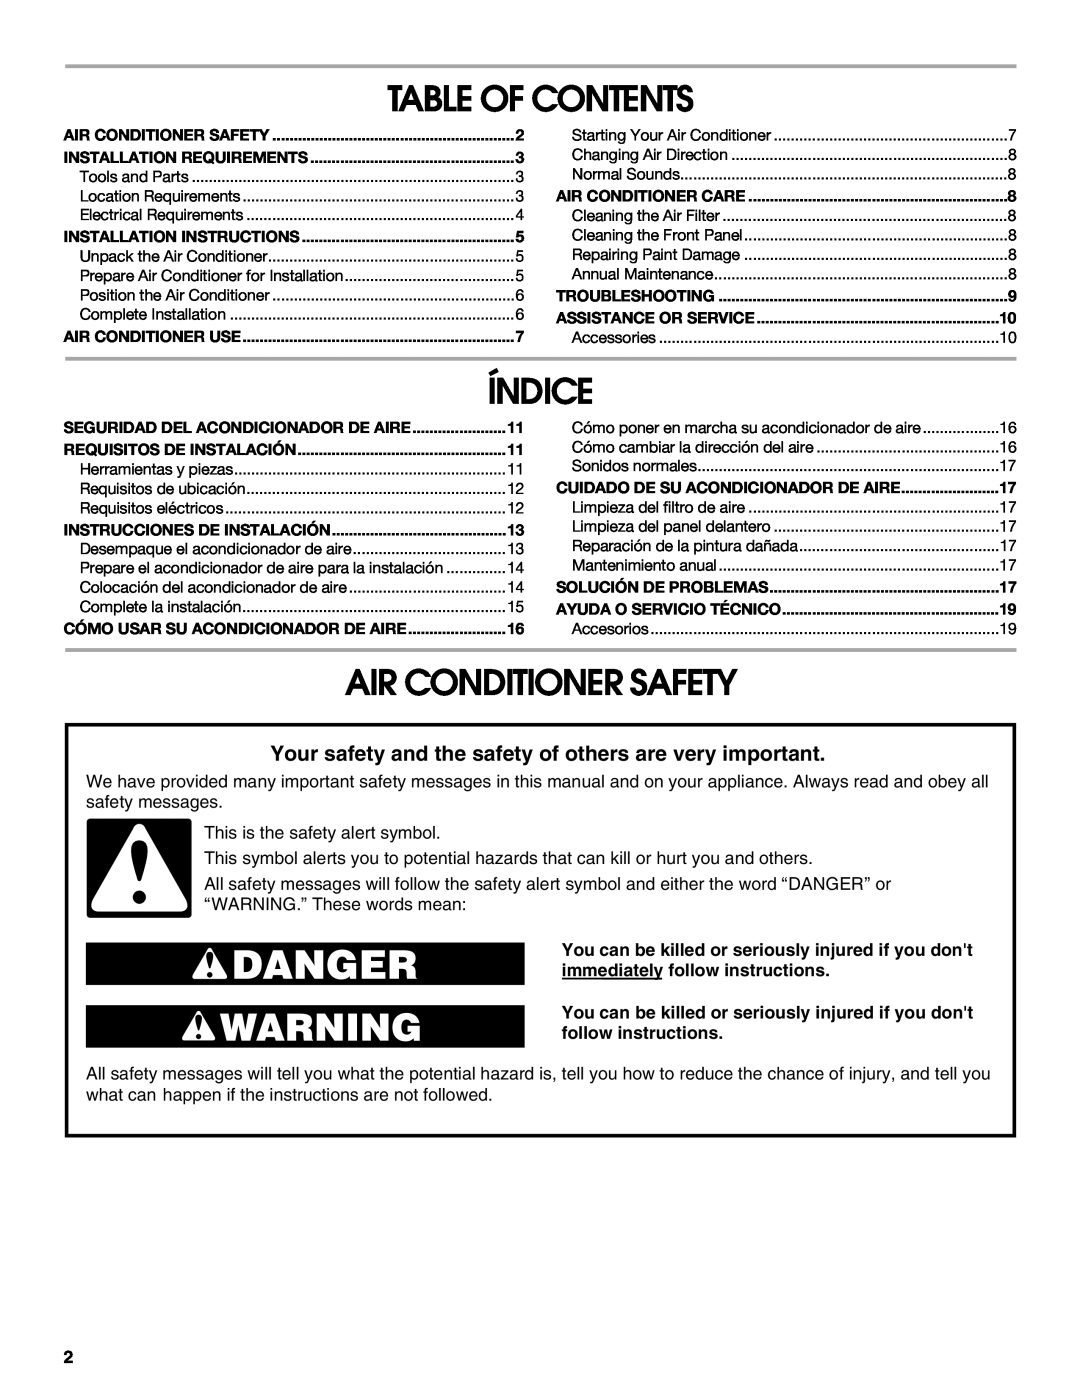 Whirlpool ACM122XR0 manual Table Of Contents, Índice, Air Conditioner Safety 